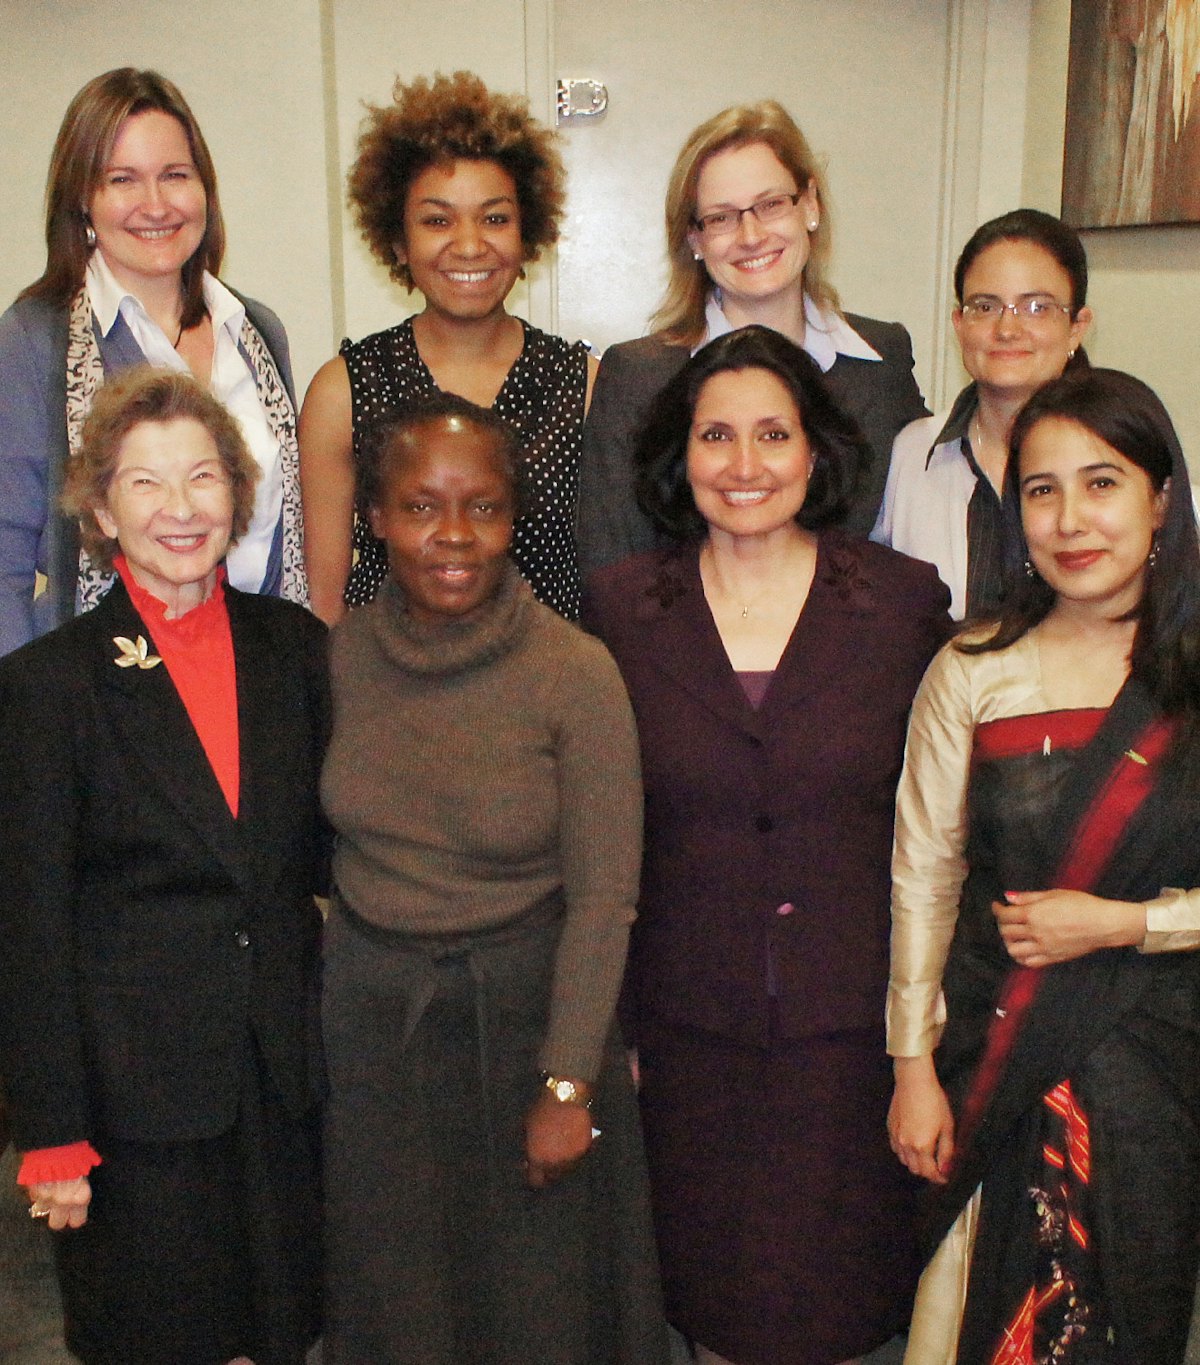 Among the Baha'i delegates to the 56th Commission on the Status of Women, held in New York from 27 February-9 March 2012, were: back row, from left, Lori Noguchi (Macau), May Akale (BIC), Julia Berger (BIC), Leslie Stewart (Colombia); Front row: Florence Kelley (Hawaii), Elizabeth Kharono (Uganda), Bani Dugal (BIC), and Nilakshi Rijkhowa (India).